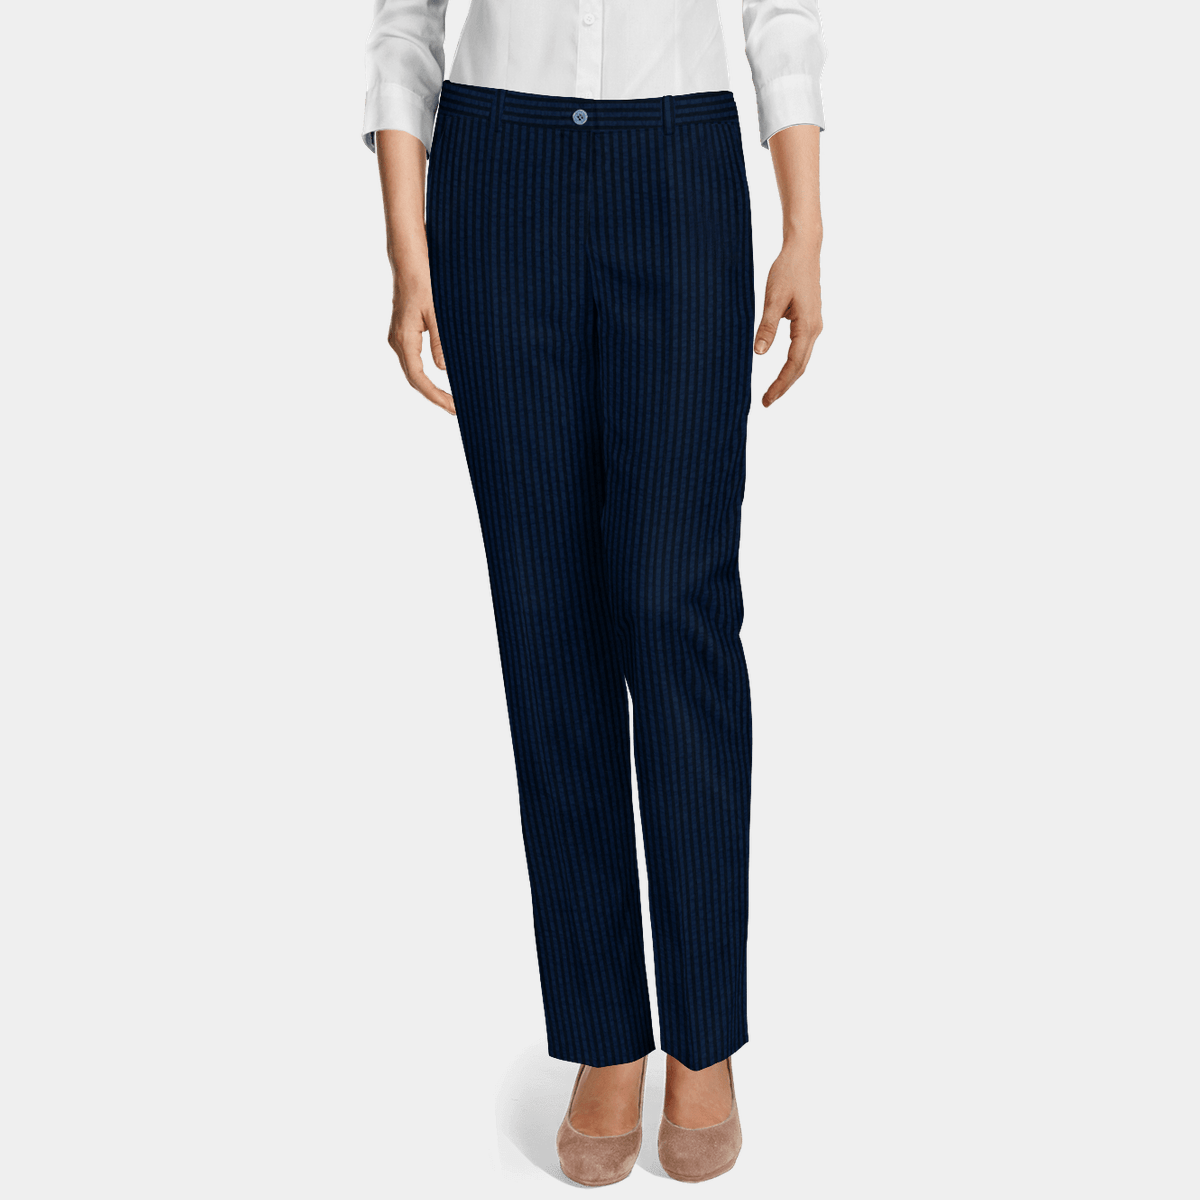 Angelo Rossi Modern Fit Blue Dress Pant